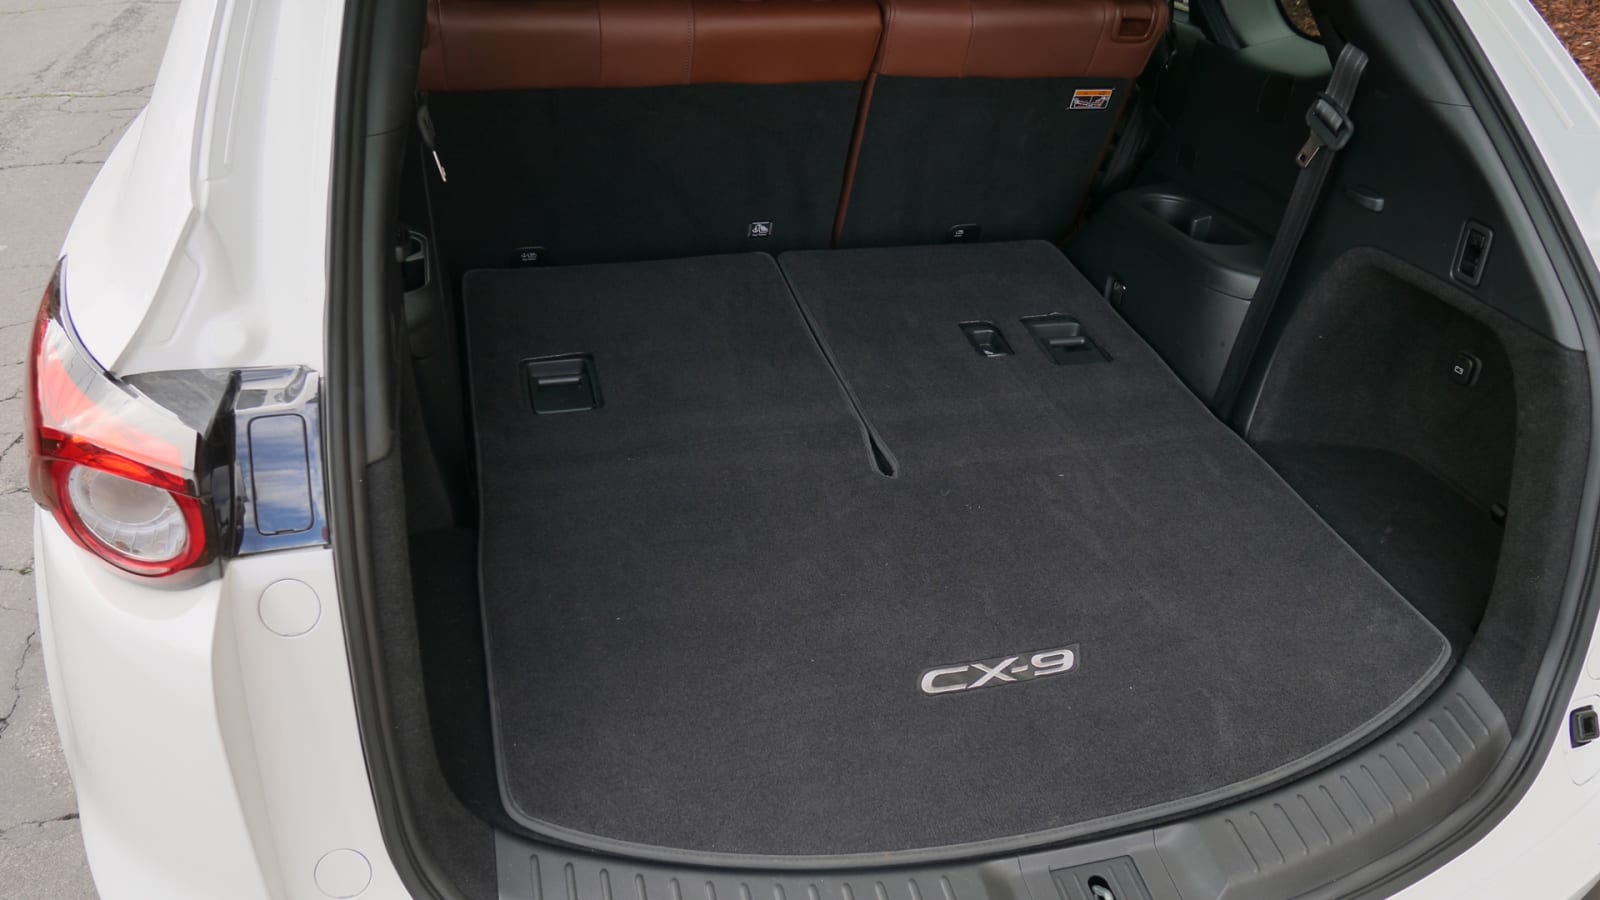 Mazda Cx 9 Luggage Test How Much Fits In The Cargo Area